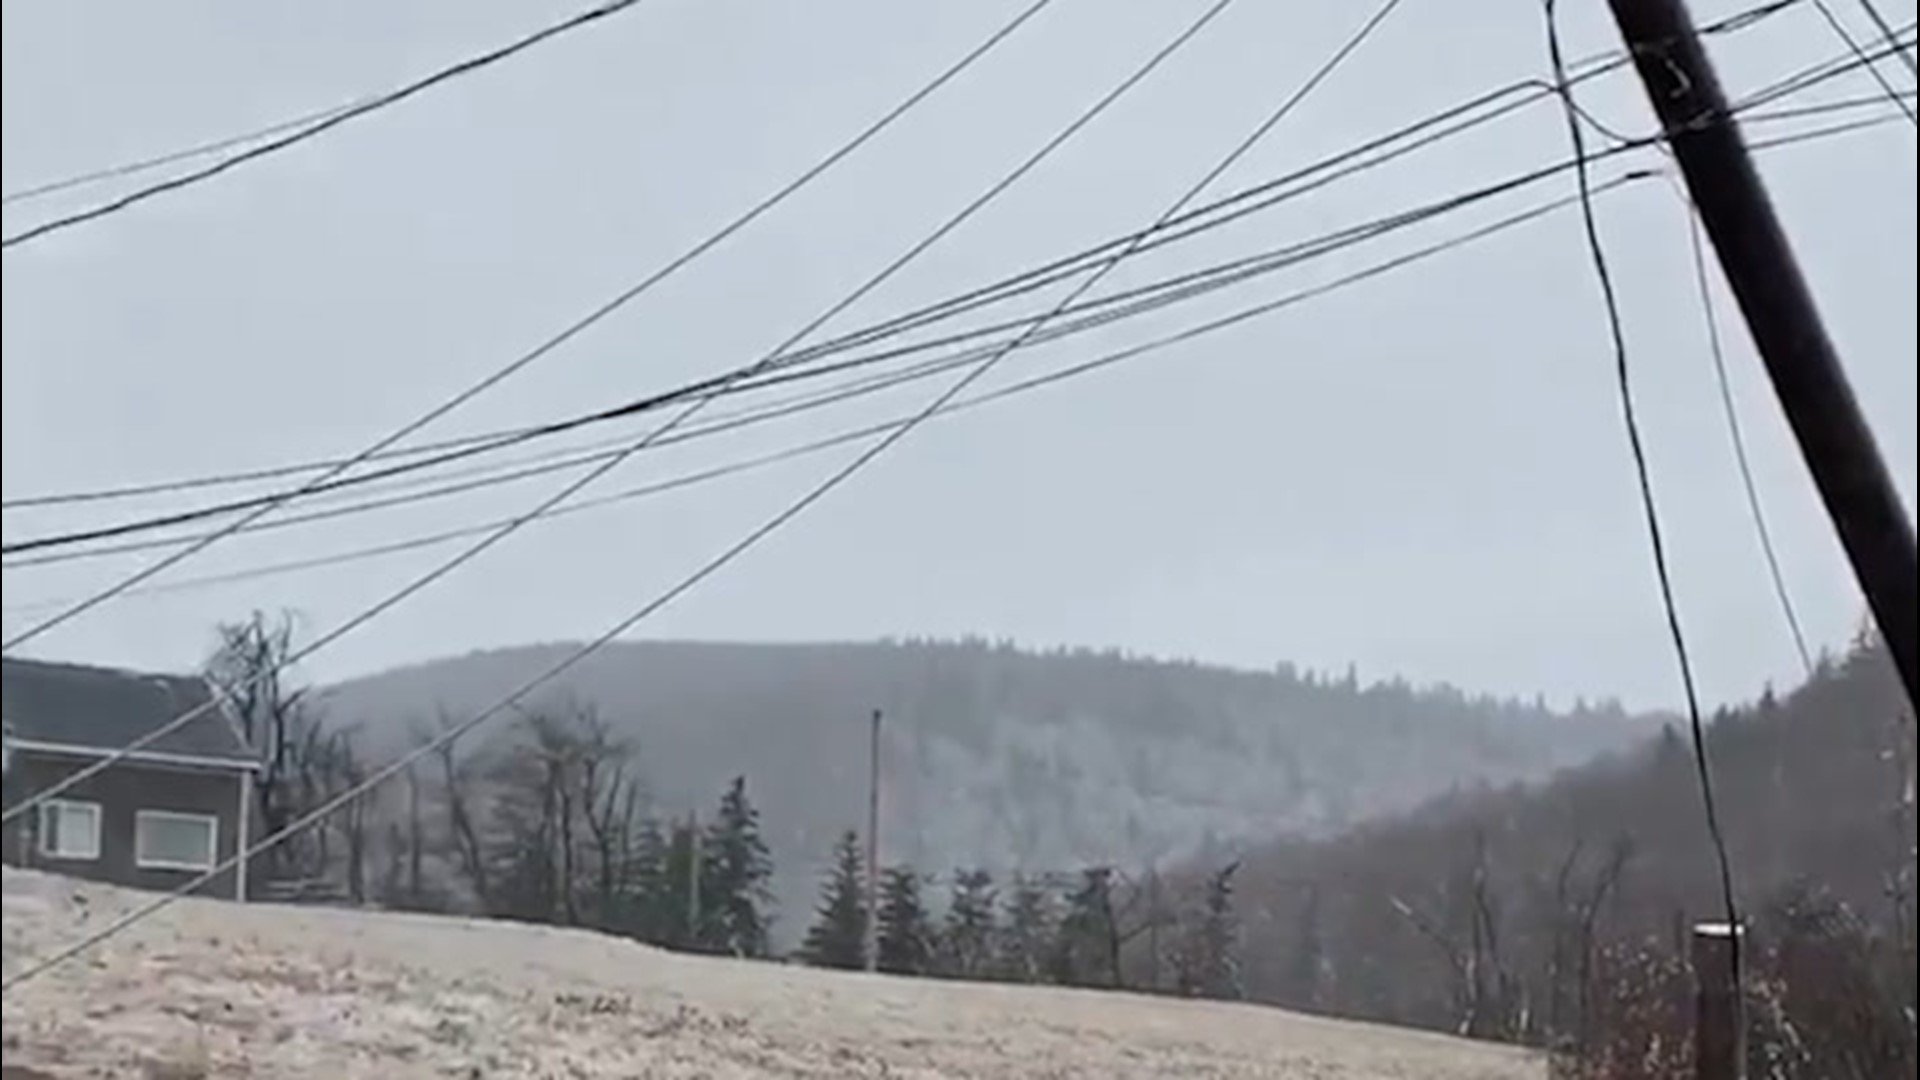 Rain and ice fell in Nova Scotia on April 4, with accumulating ice knocking down power lines and causing treacherous road conditions.